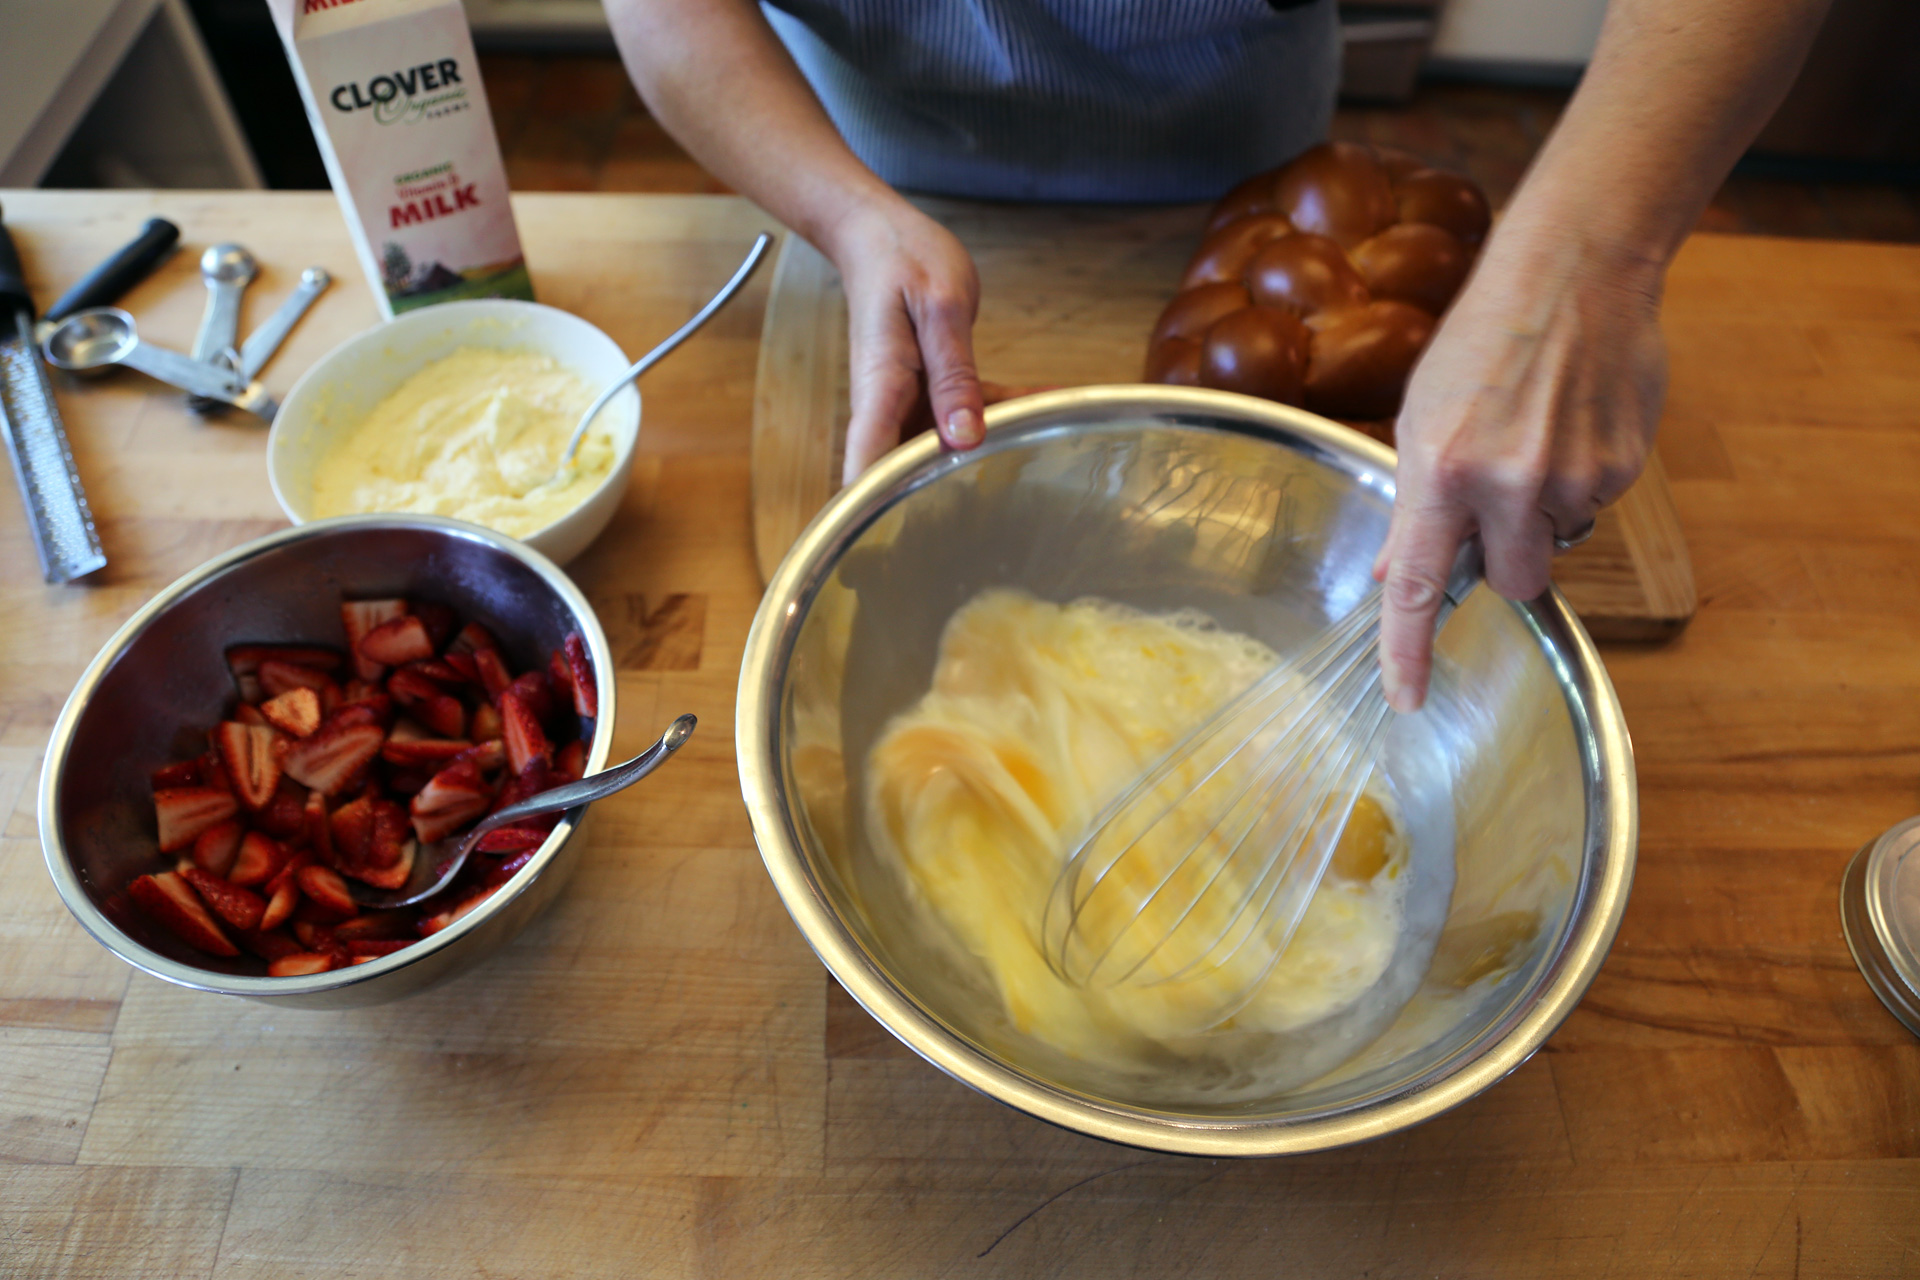 In a large shallow bowl, whisk together the eggs, milk, vanilla extract, and a pinch of salt.